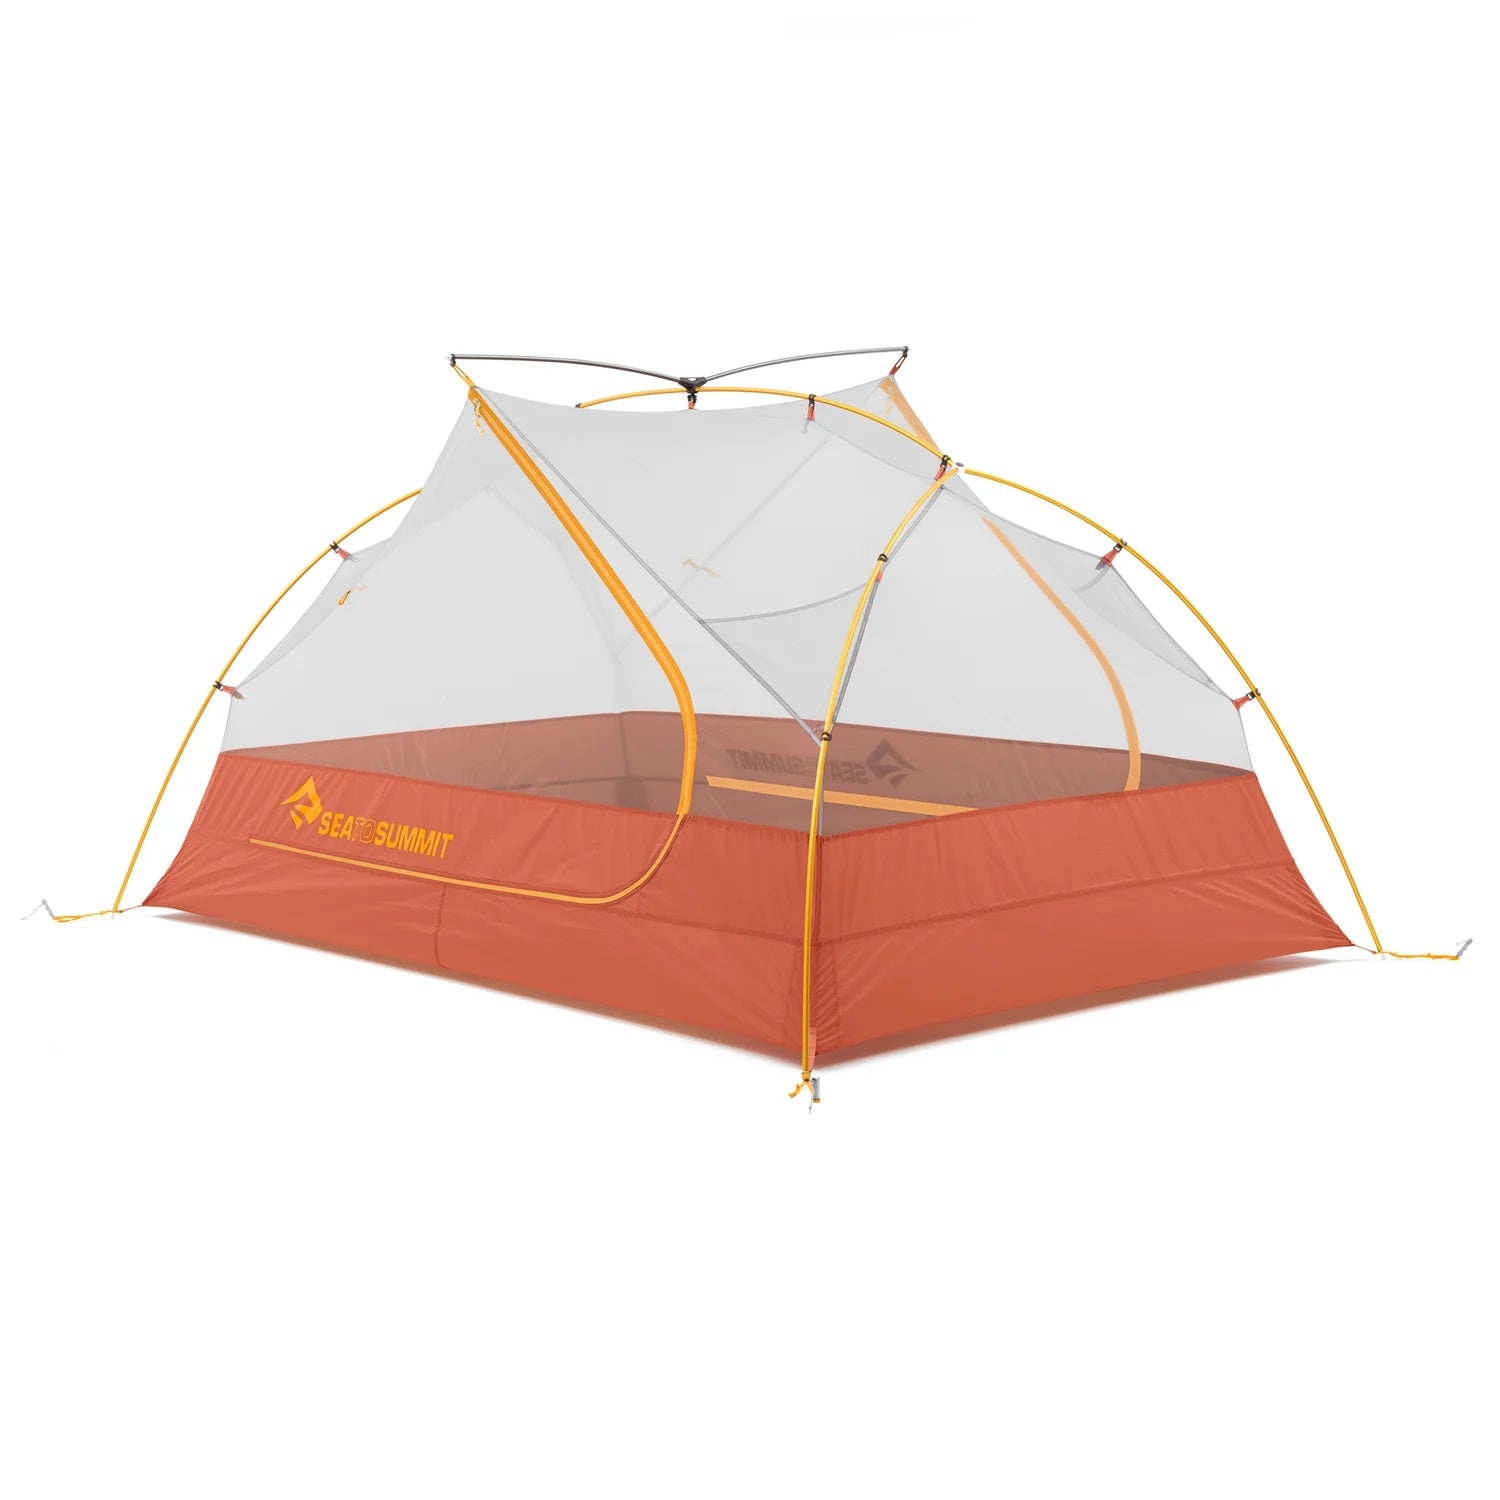 Sea to Summit Ikos TR2 Two Person Tent